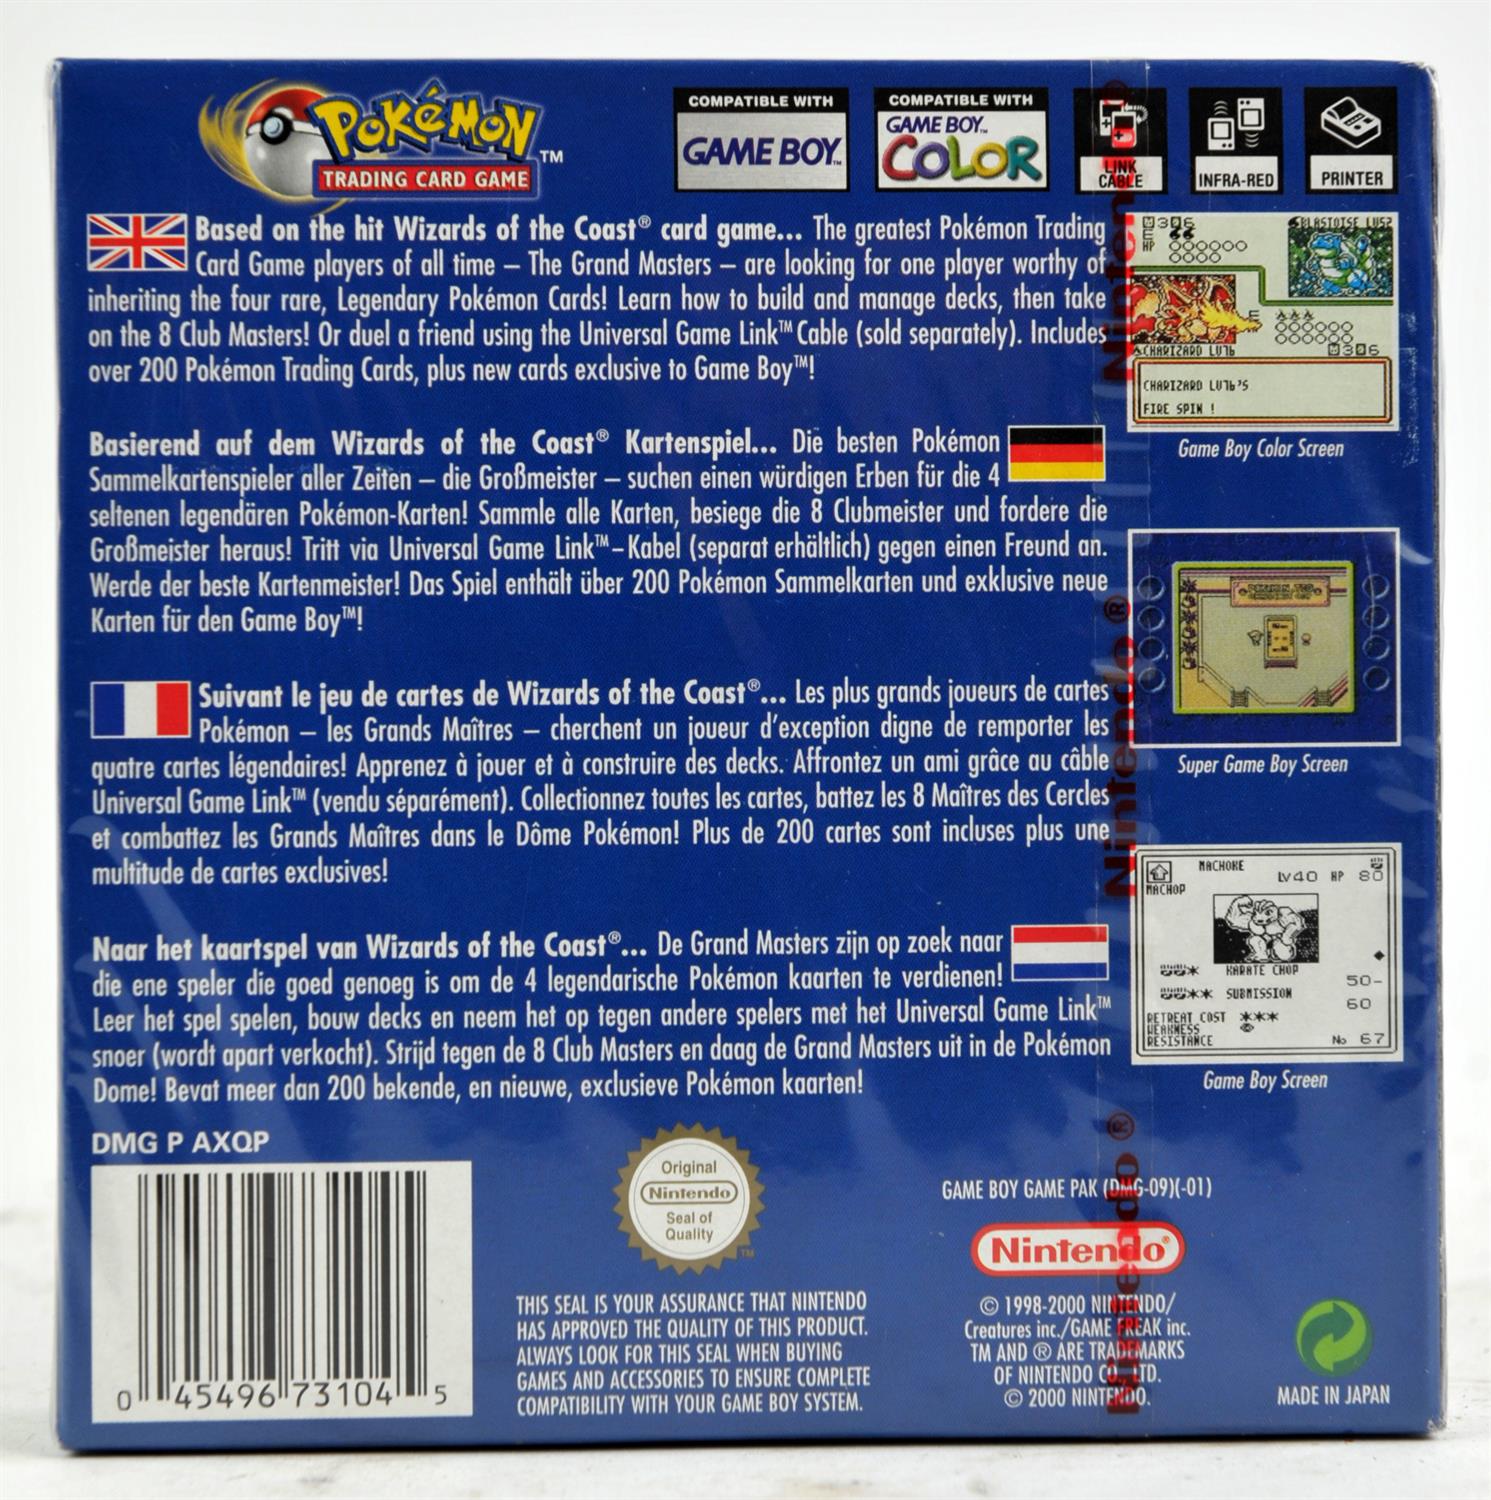 Pokémon Trading Card Game - factory sealed Game Boy game with red strip Nintendo seal (PAL) - Image 2 of 3